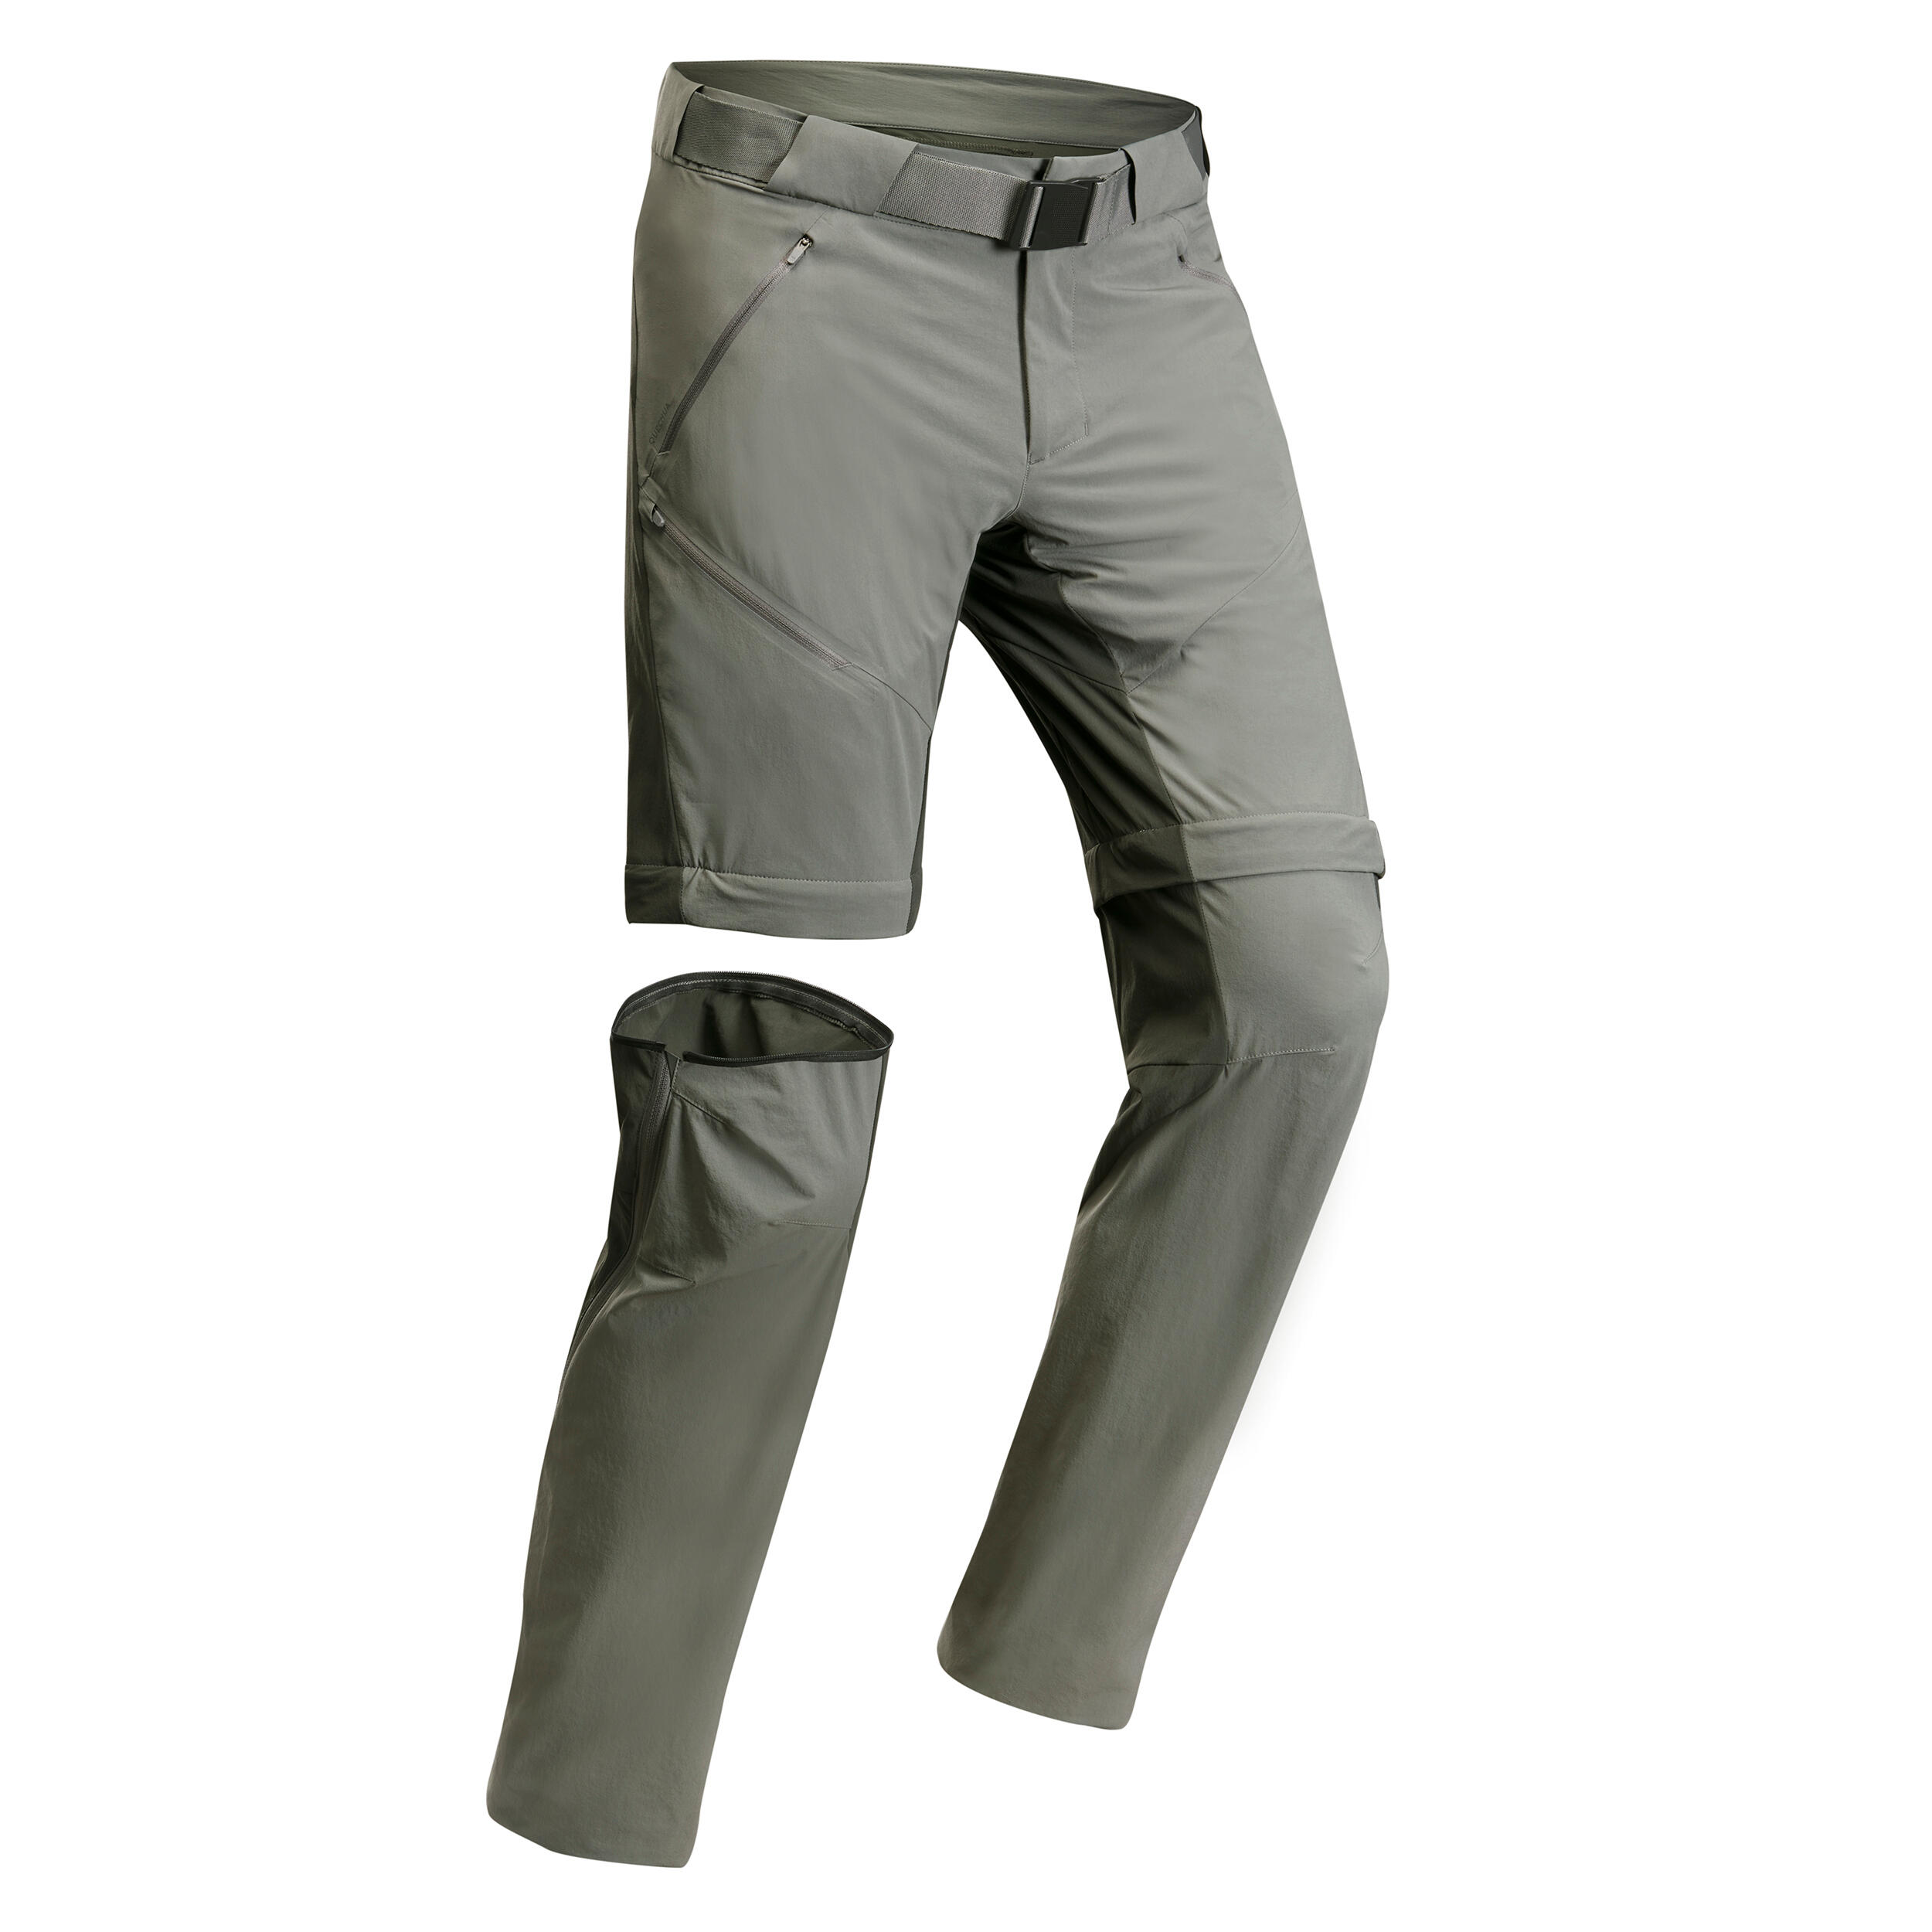 Buy Mens Hiking Pants Convertible Quick Dry Lightweight Zip Off Outdoor  Fishing Travel Safari Work Cargo Trousers at Amazon.in